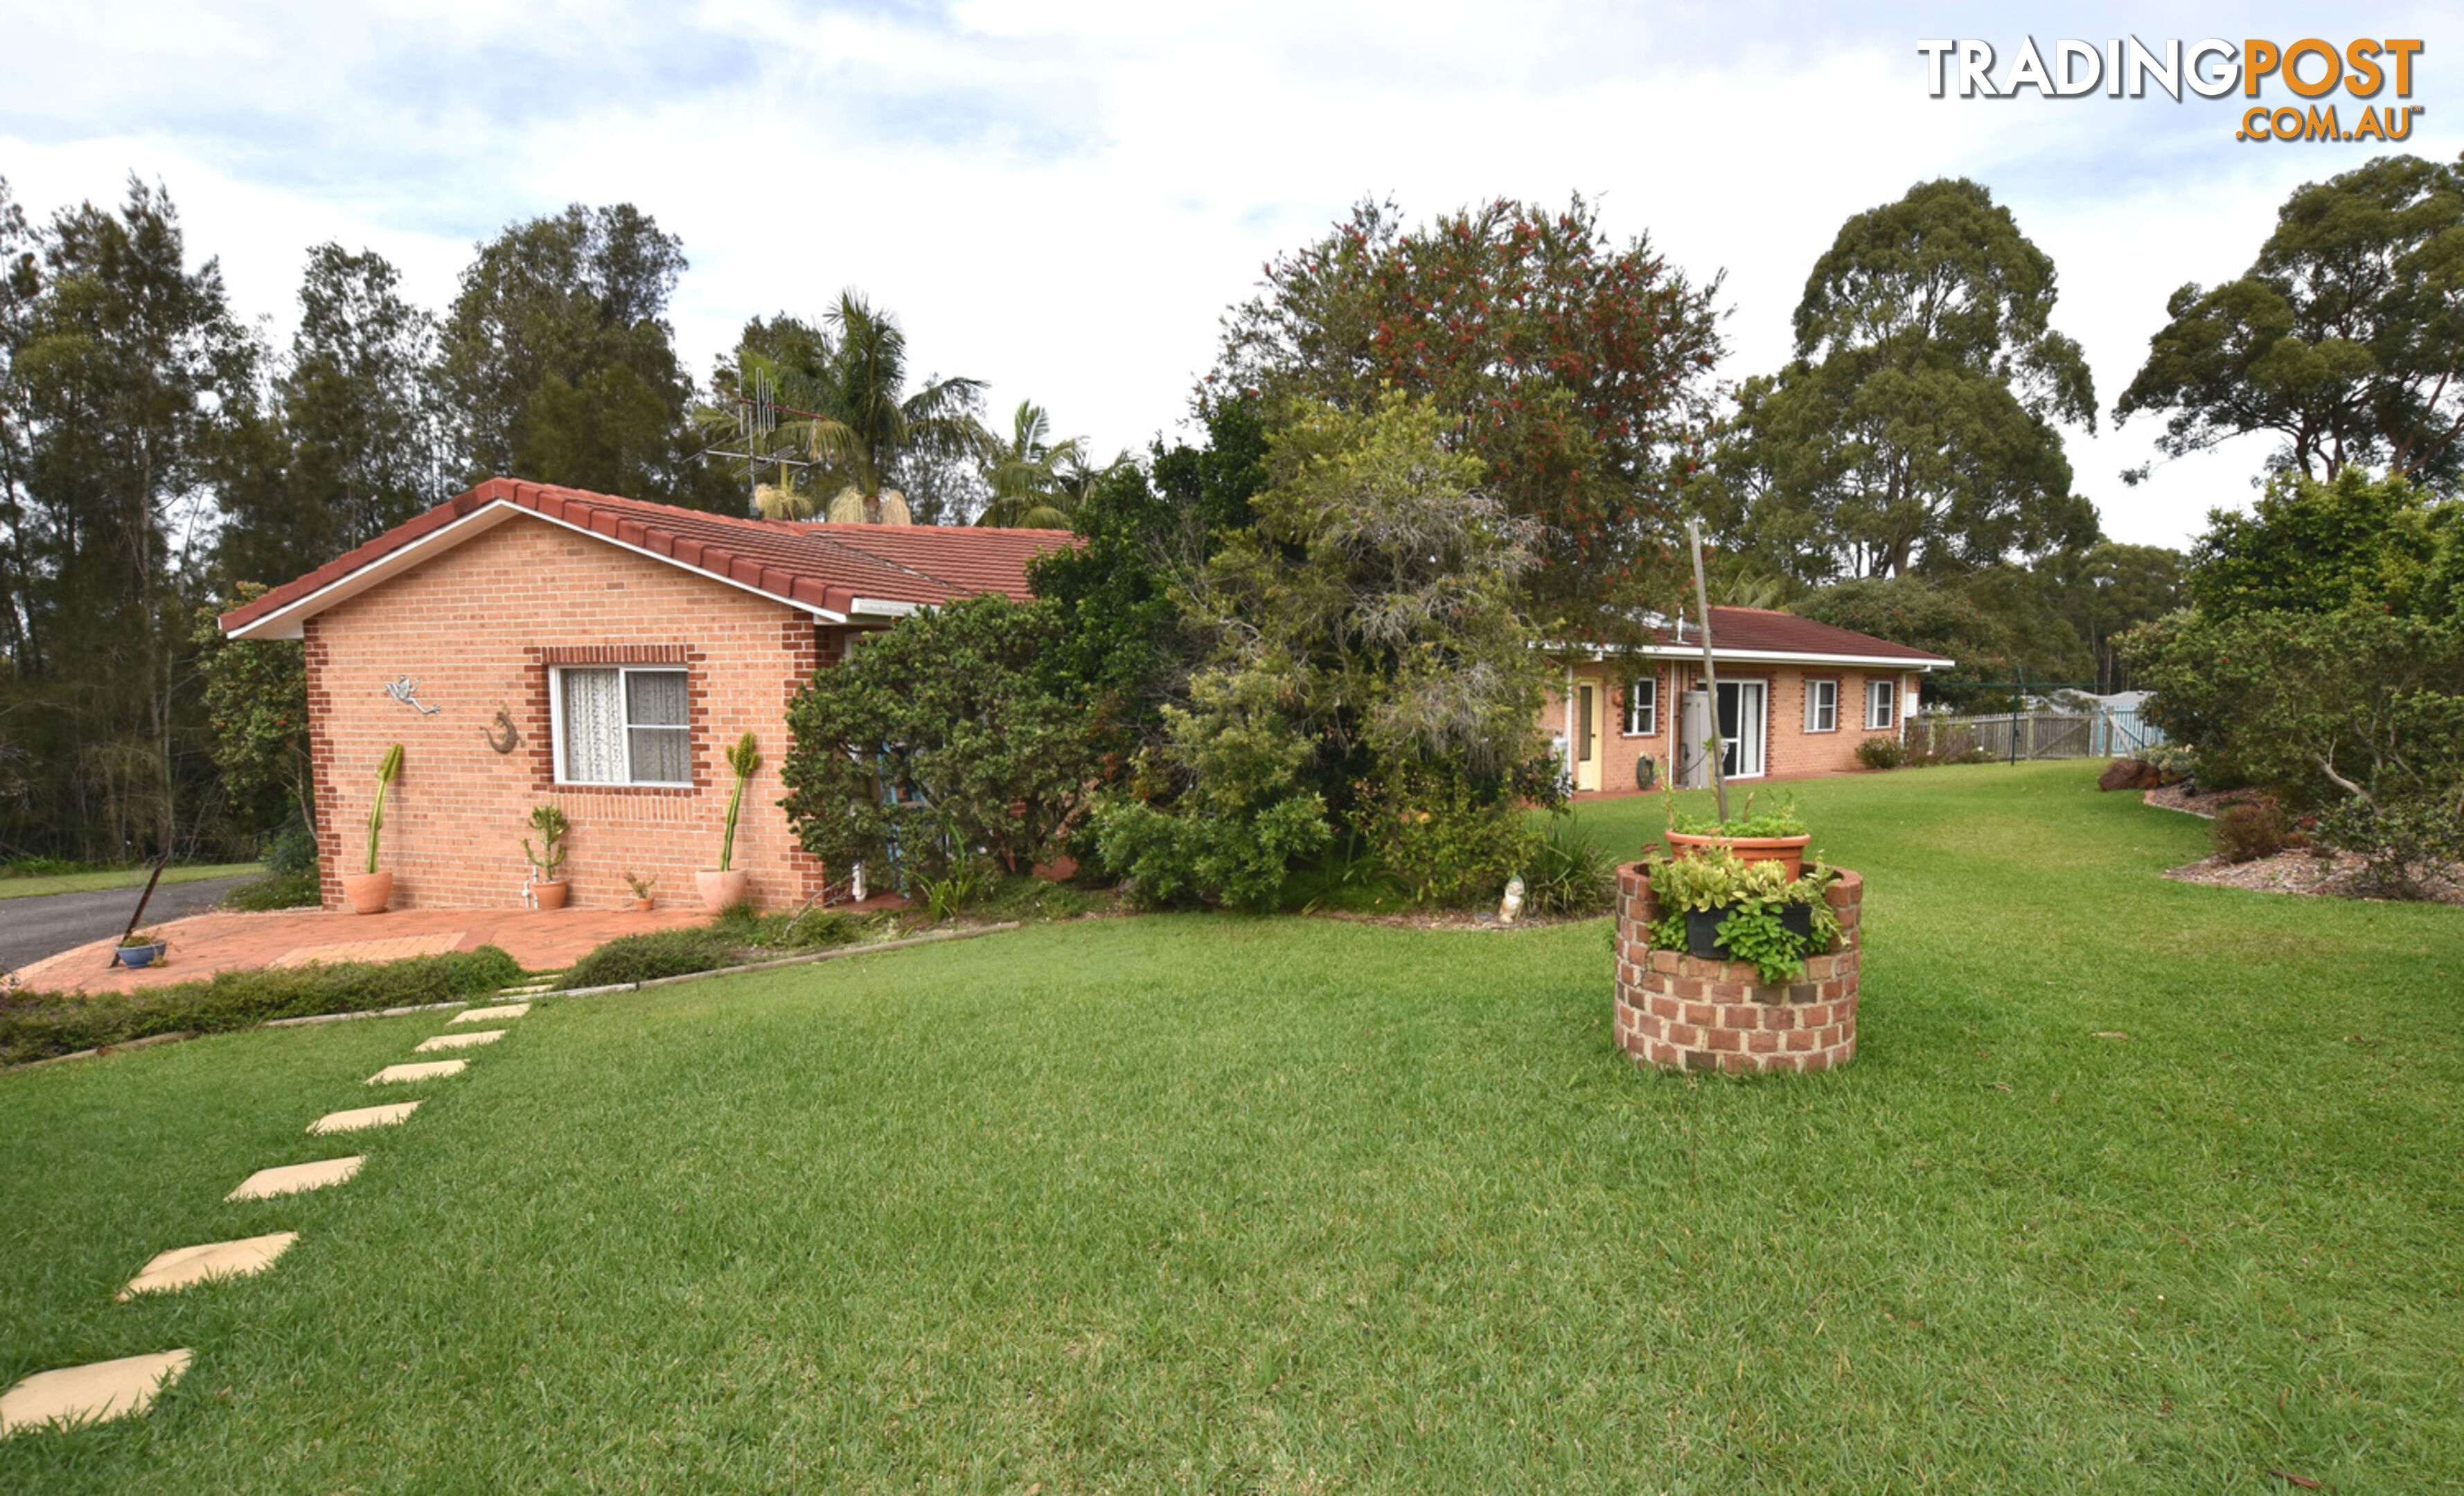 23 Springhill Place Lake Cathie NSW 2445